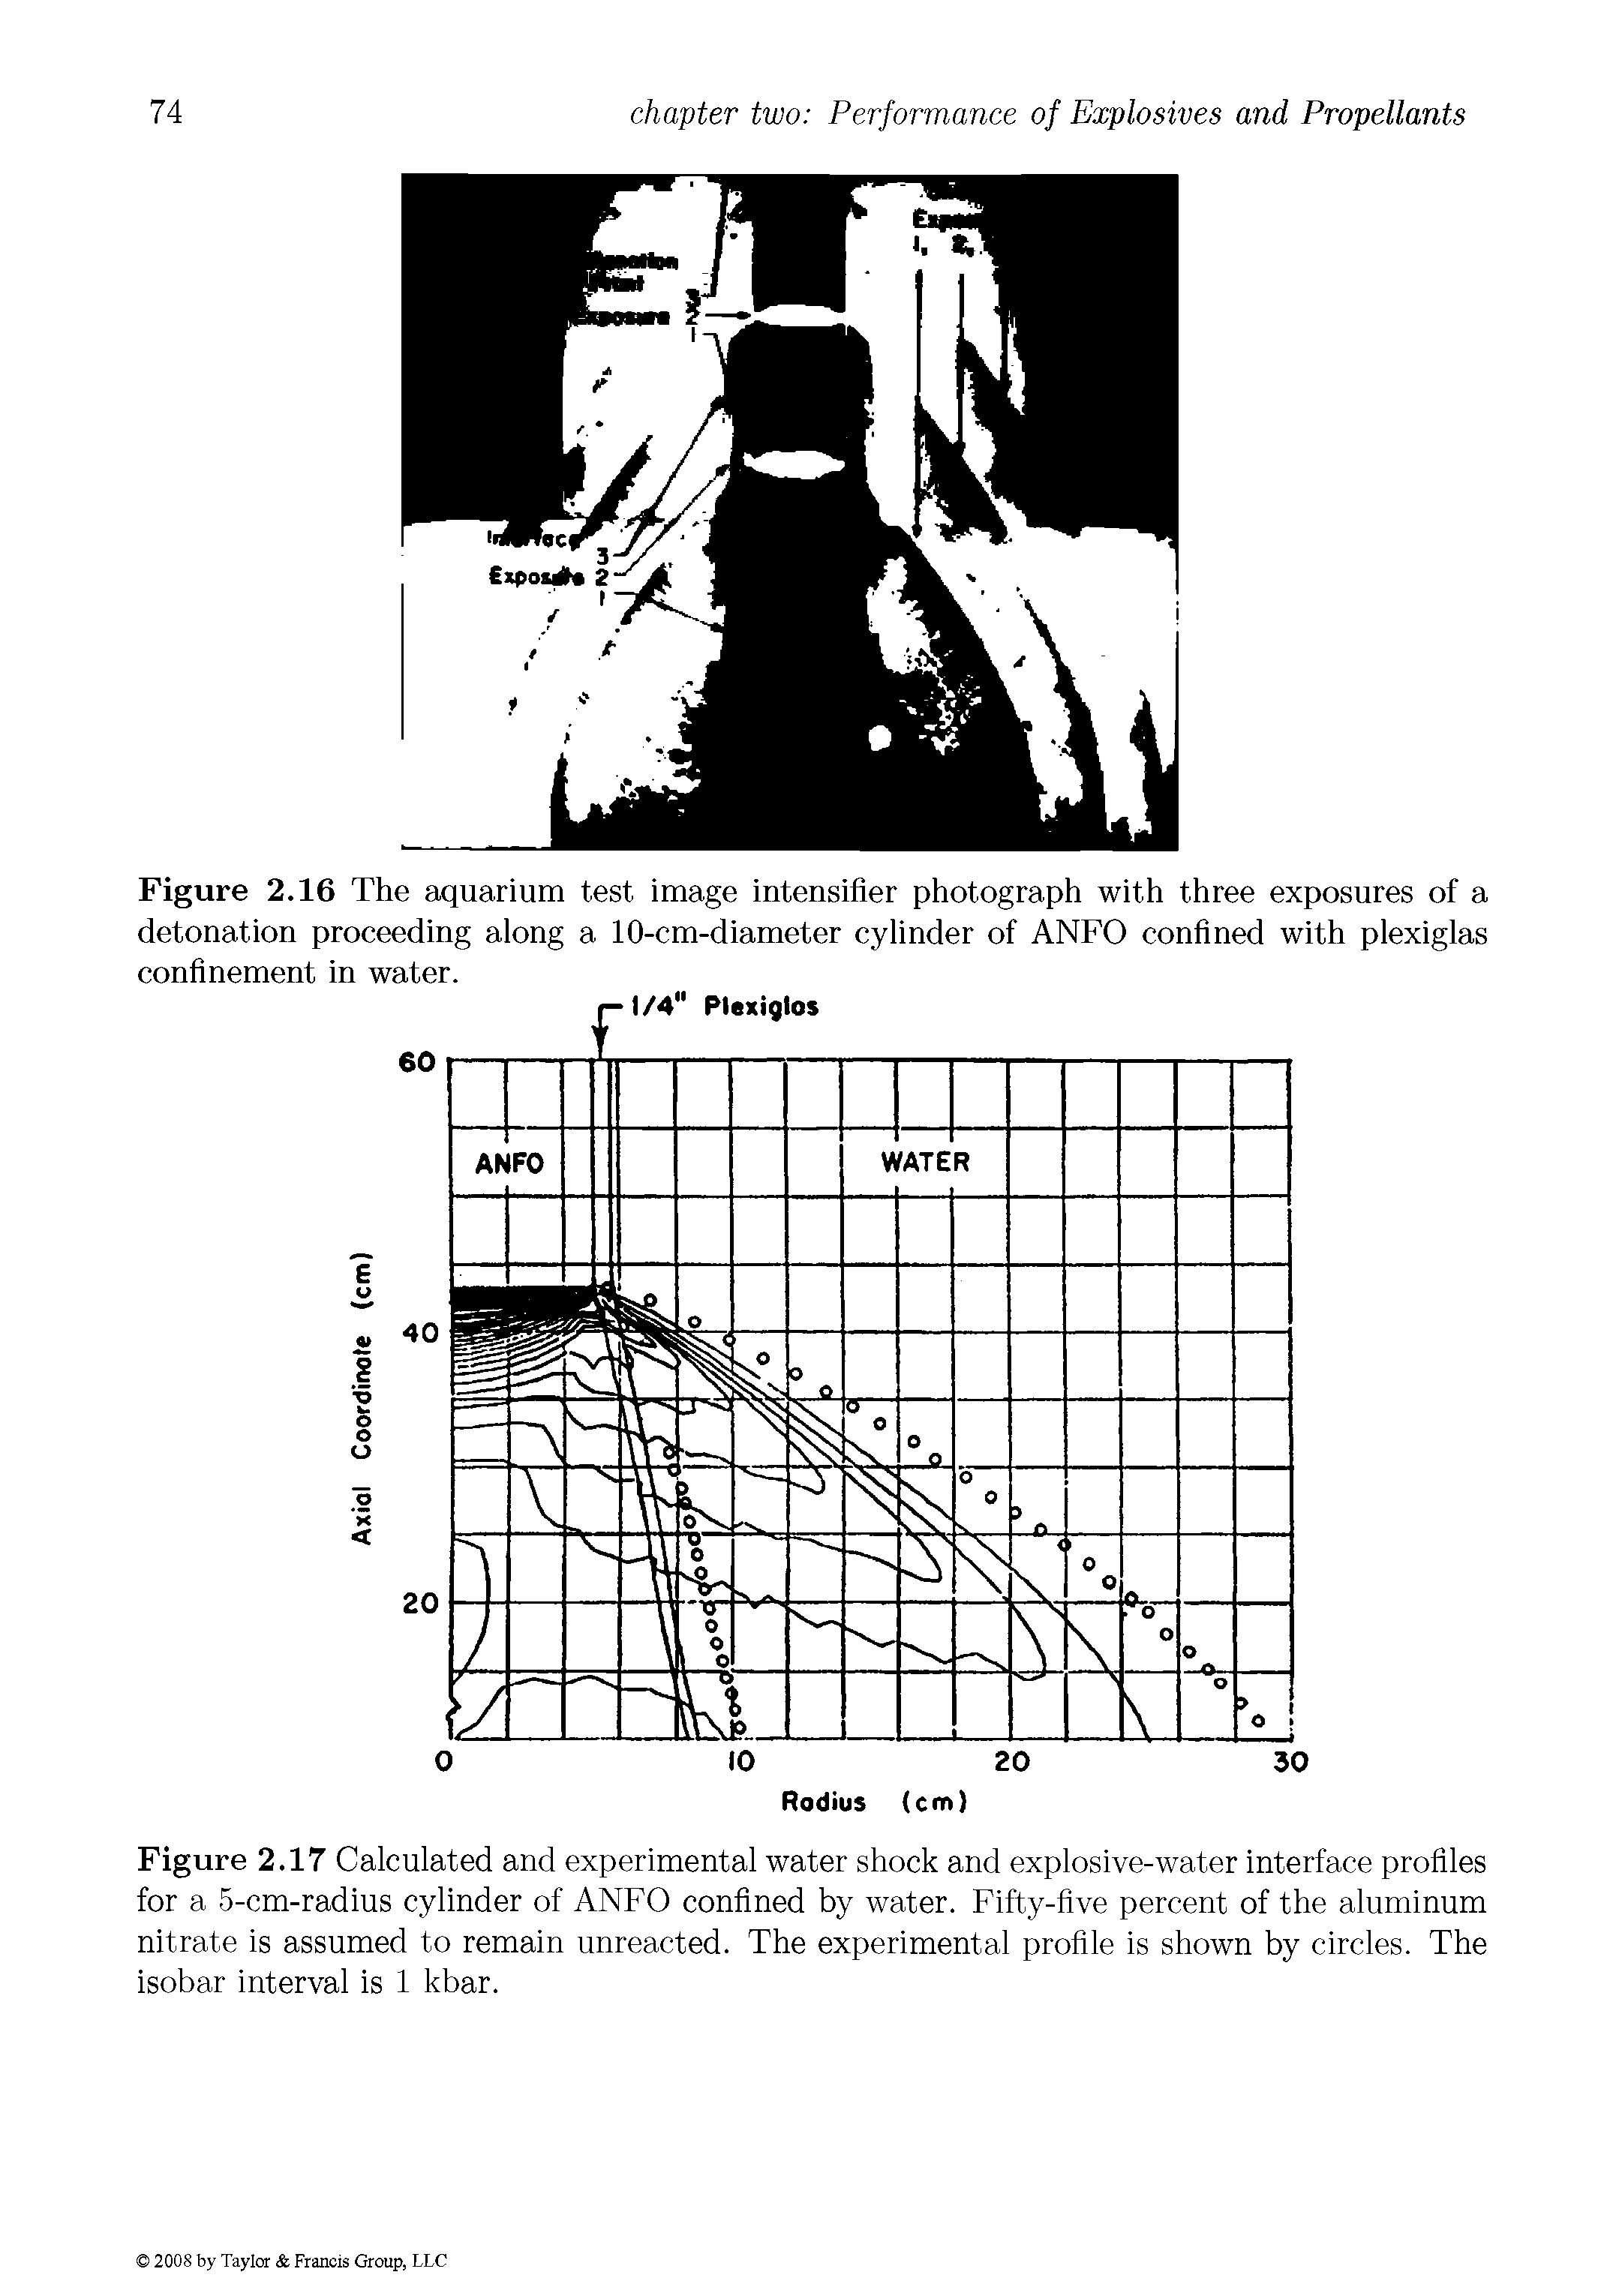 Figure 2.17 Calculated and experimental water shock and explosive-water interface profiles for a 5-cm-radius cylinder of ANFO confined by water. Fifty-five percent of the aluminum nitrate is assumed to remain unreacted. The experimental profile is shown by circles. The isobar interval is 1 kbar.